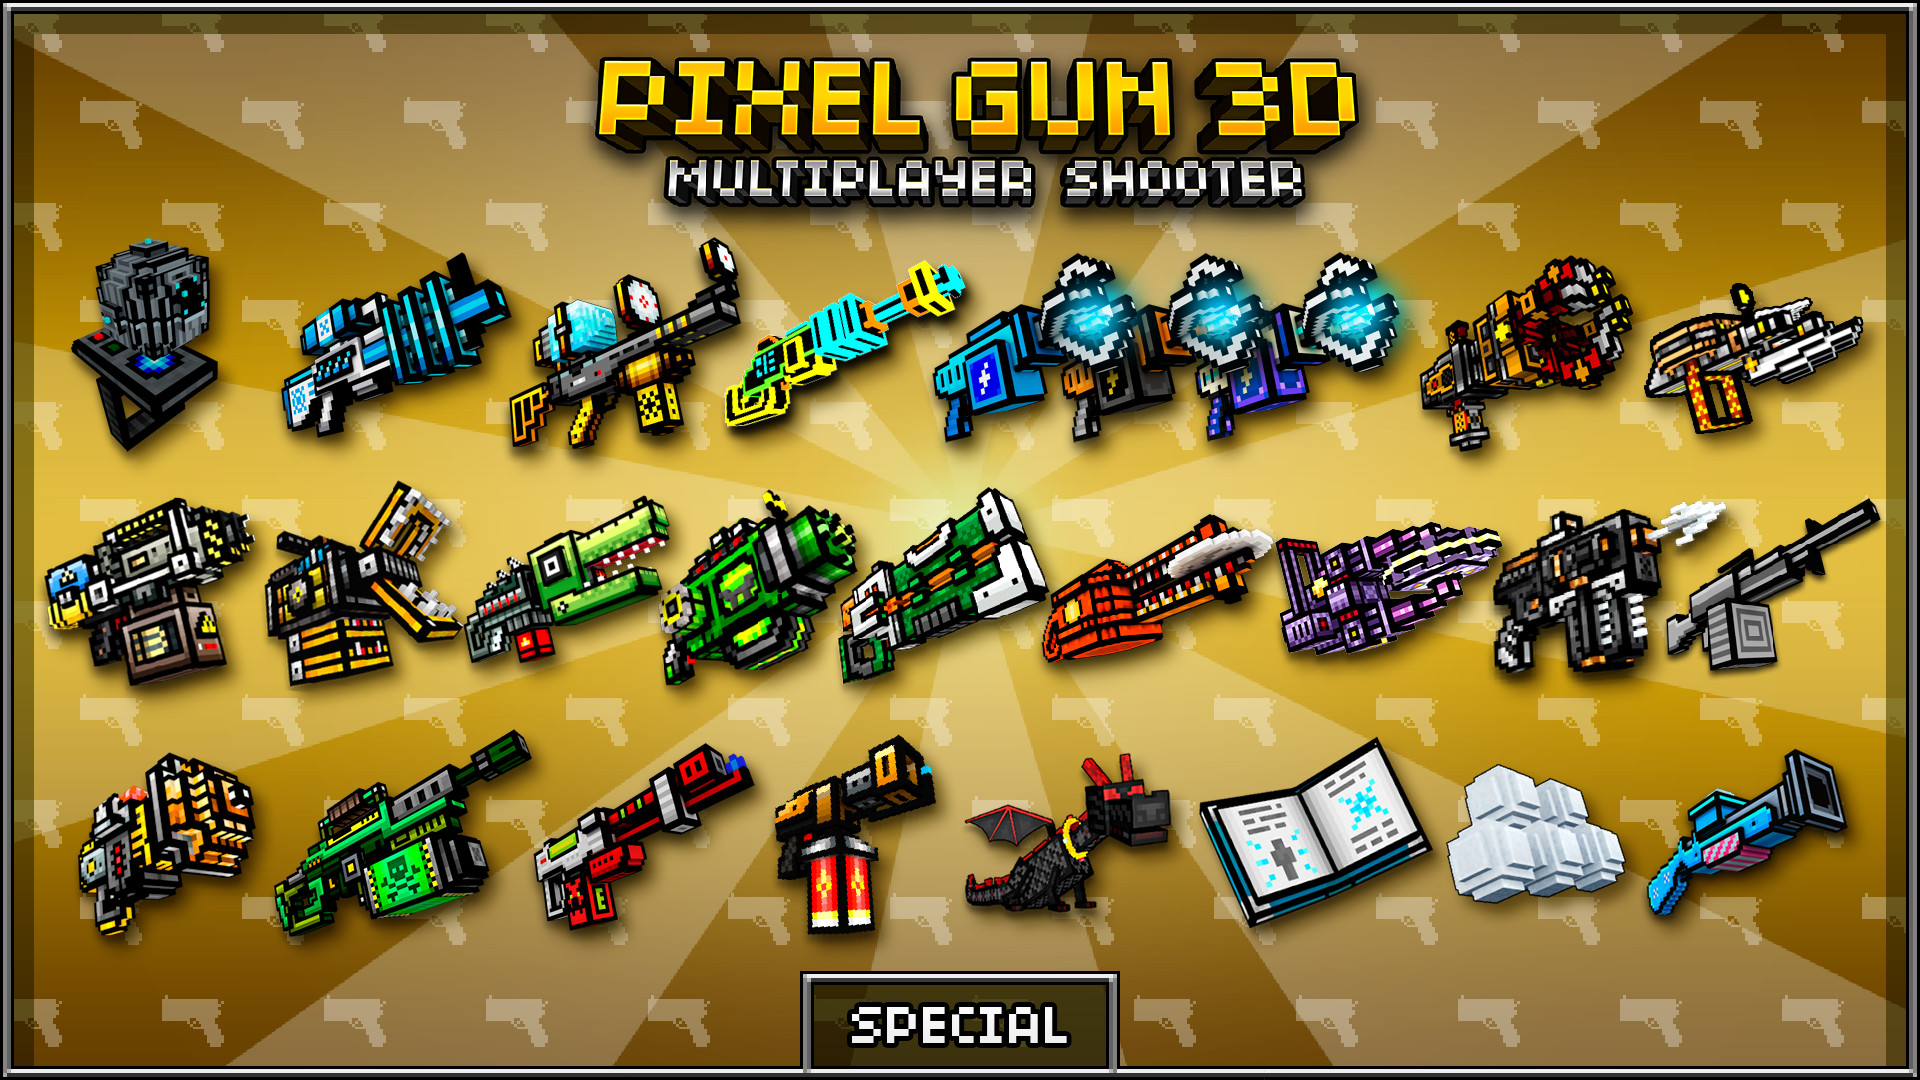 1920x1080 Pixel Gun 3D on Twitter: "Special weapon for a special case! What is your  favorite special gun? https://t.co/NGQ18wL1gx #PixelGun3D #pg3d ...